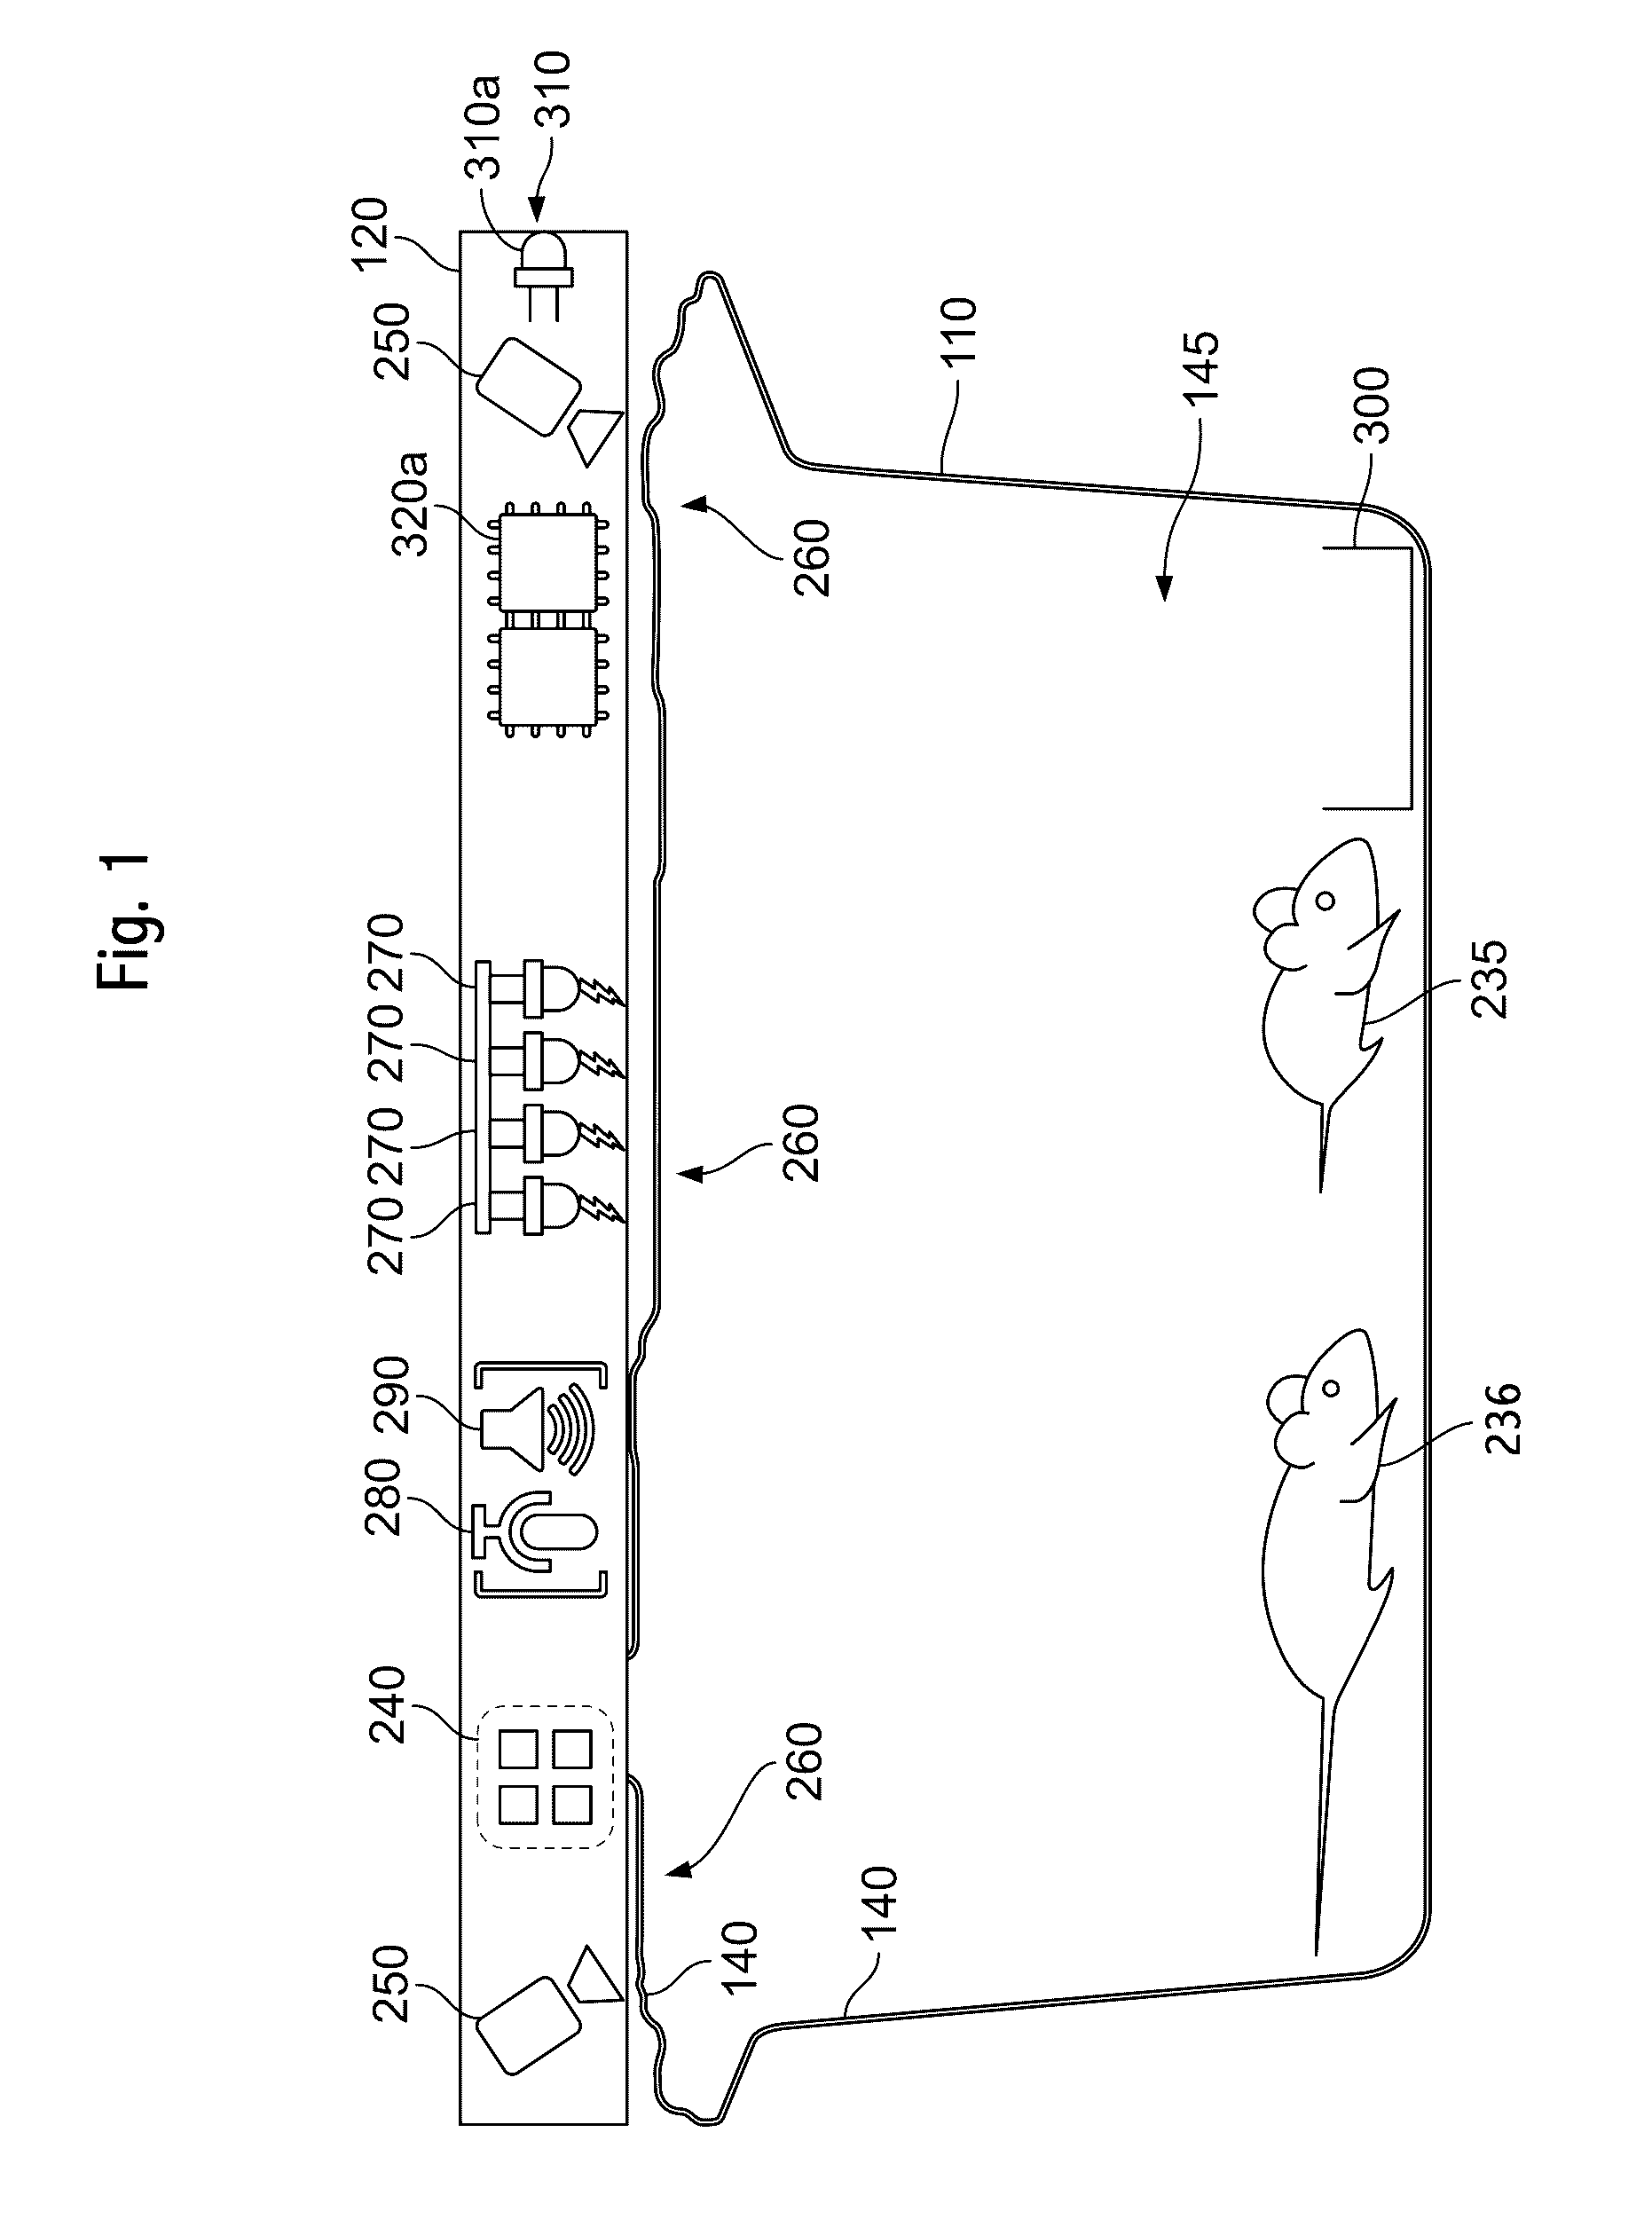 System and method of automatic classification of animal behaviors